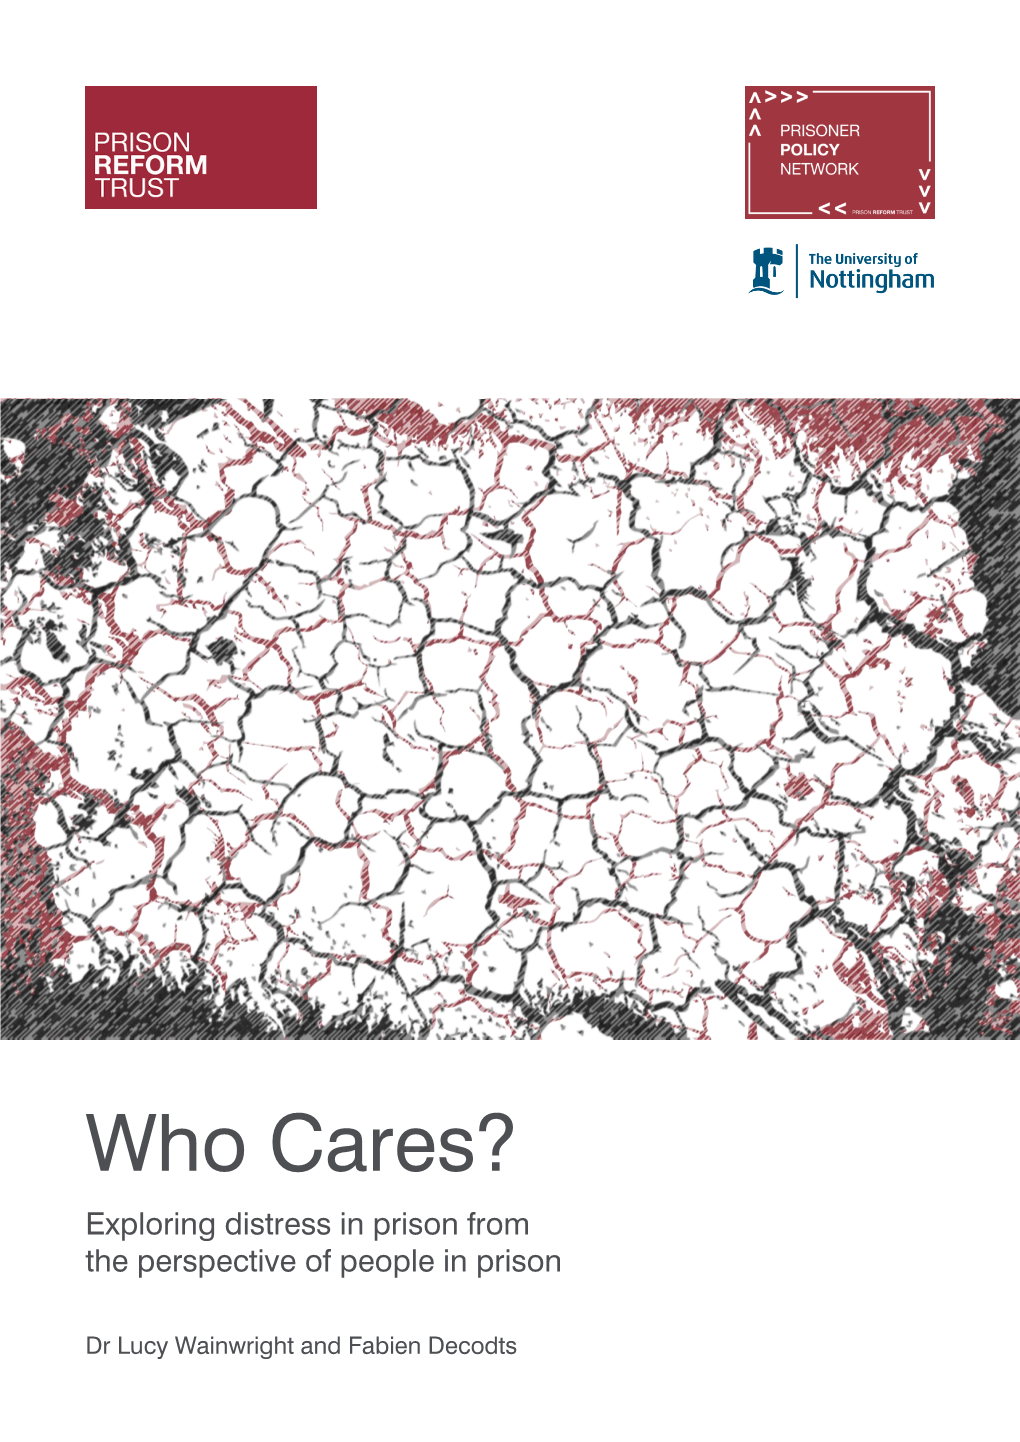 Who Cares? Exploring Distress in Prison from the Perspective of People in Prison